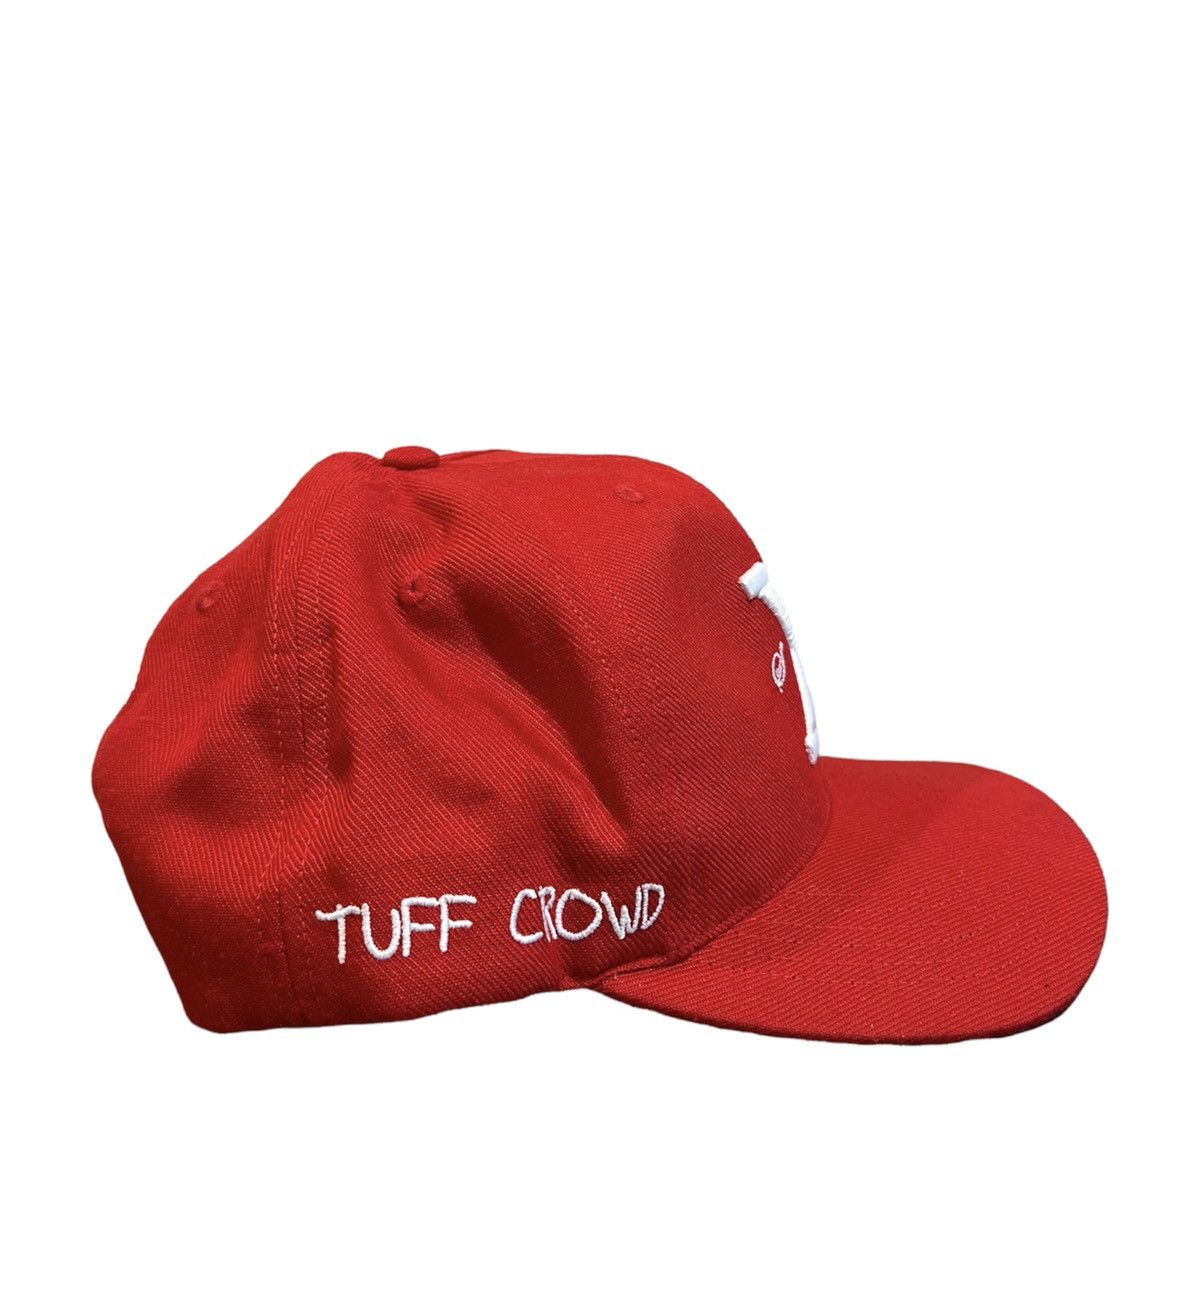 Tuff Crowd Tuff Crowd Detroit Red Snapback Hat Size ONE SIZE - 2 Preview